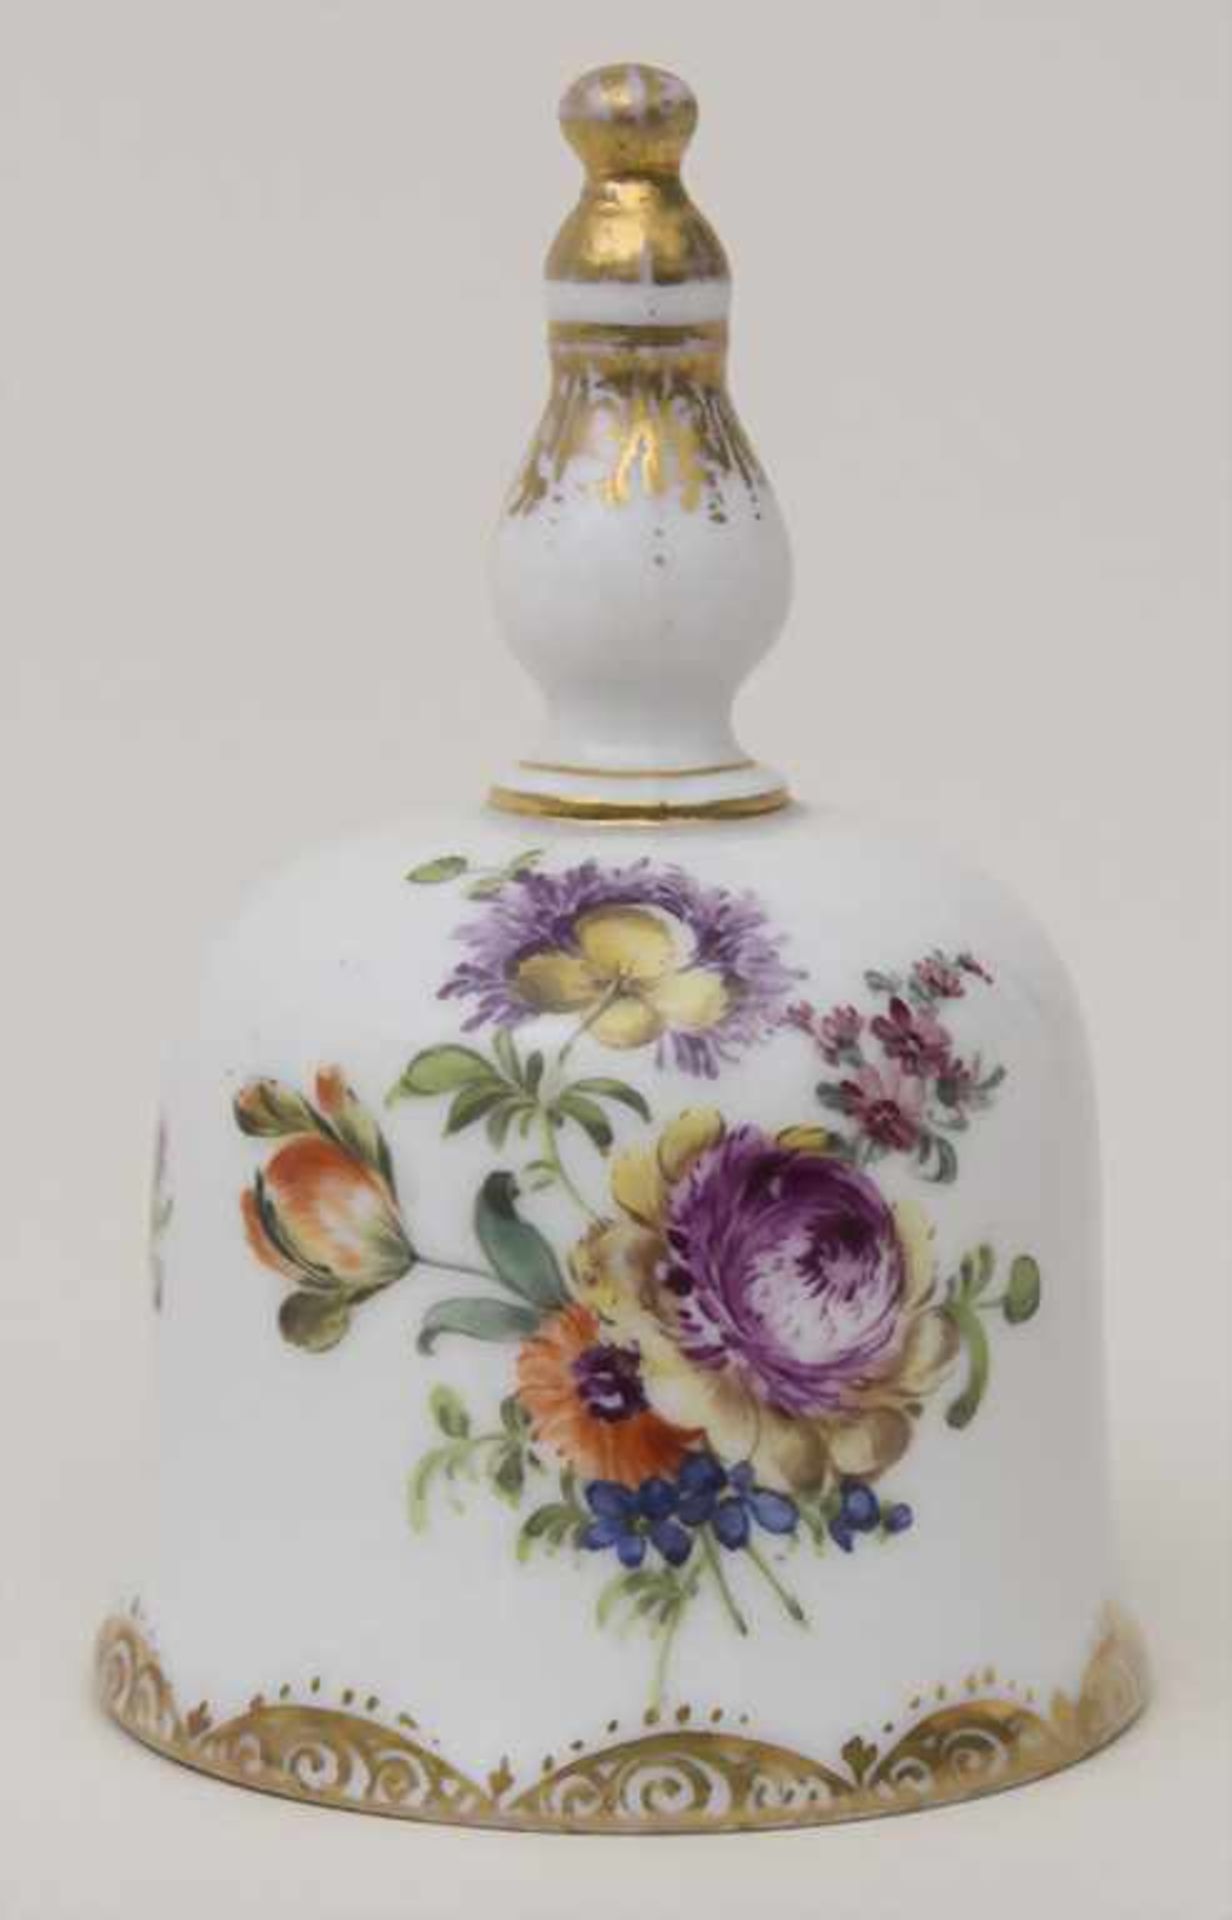 Tischglocke mit Blumenmalerei / A table bell with flowers, wohl Dresden, Ende 19. Jh.Material: